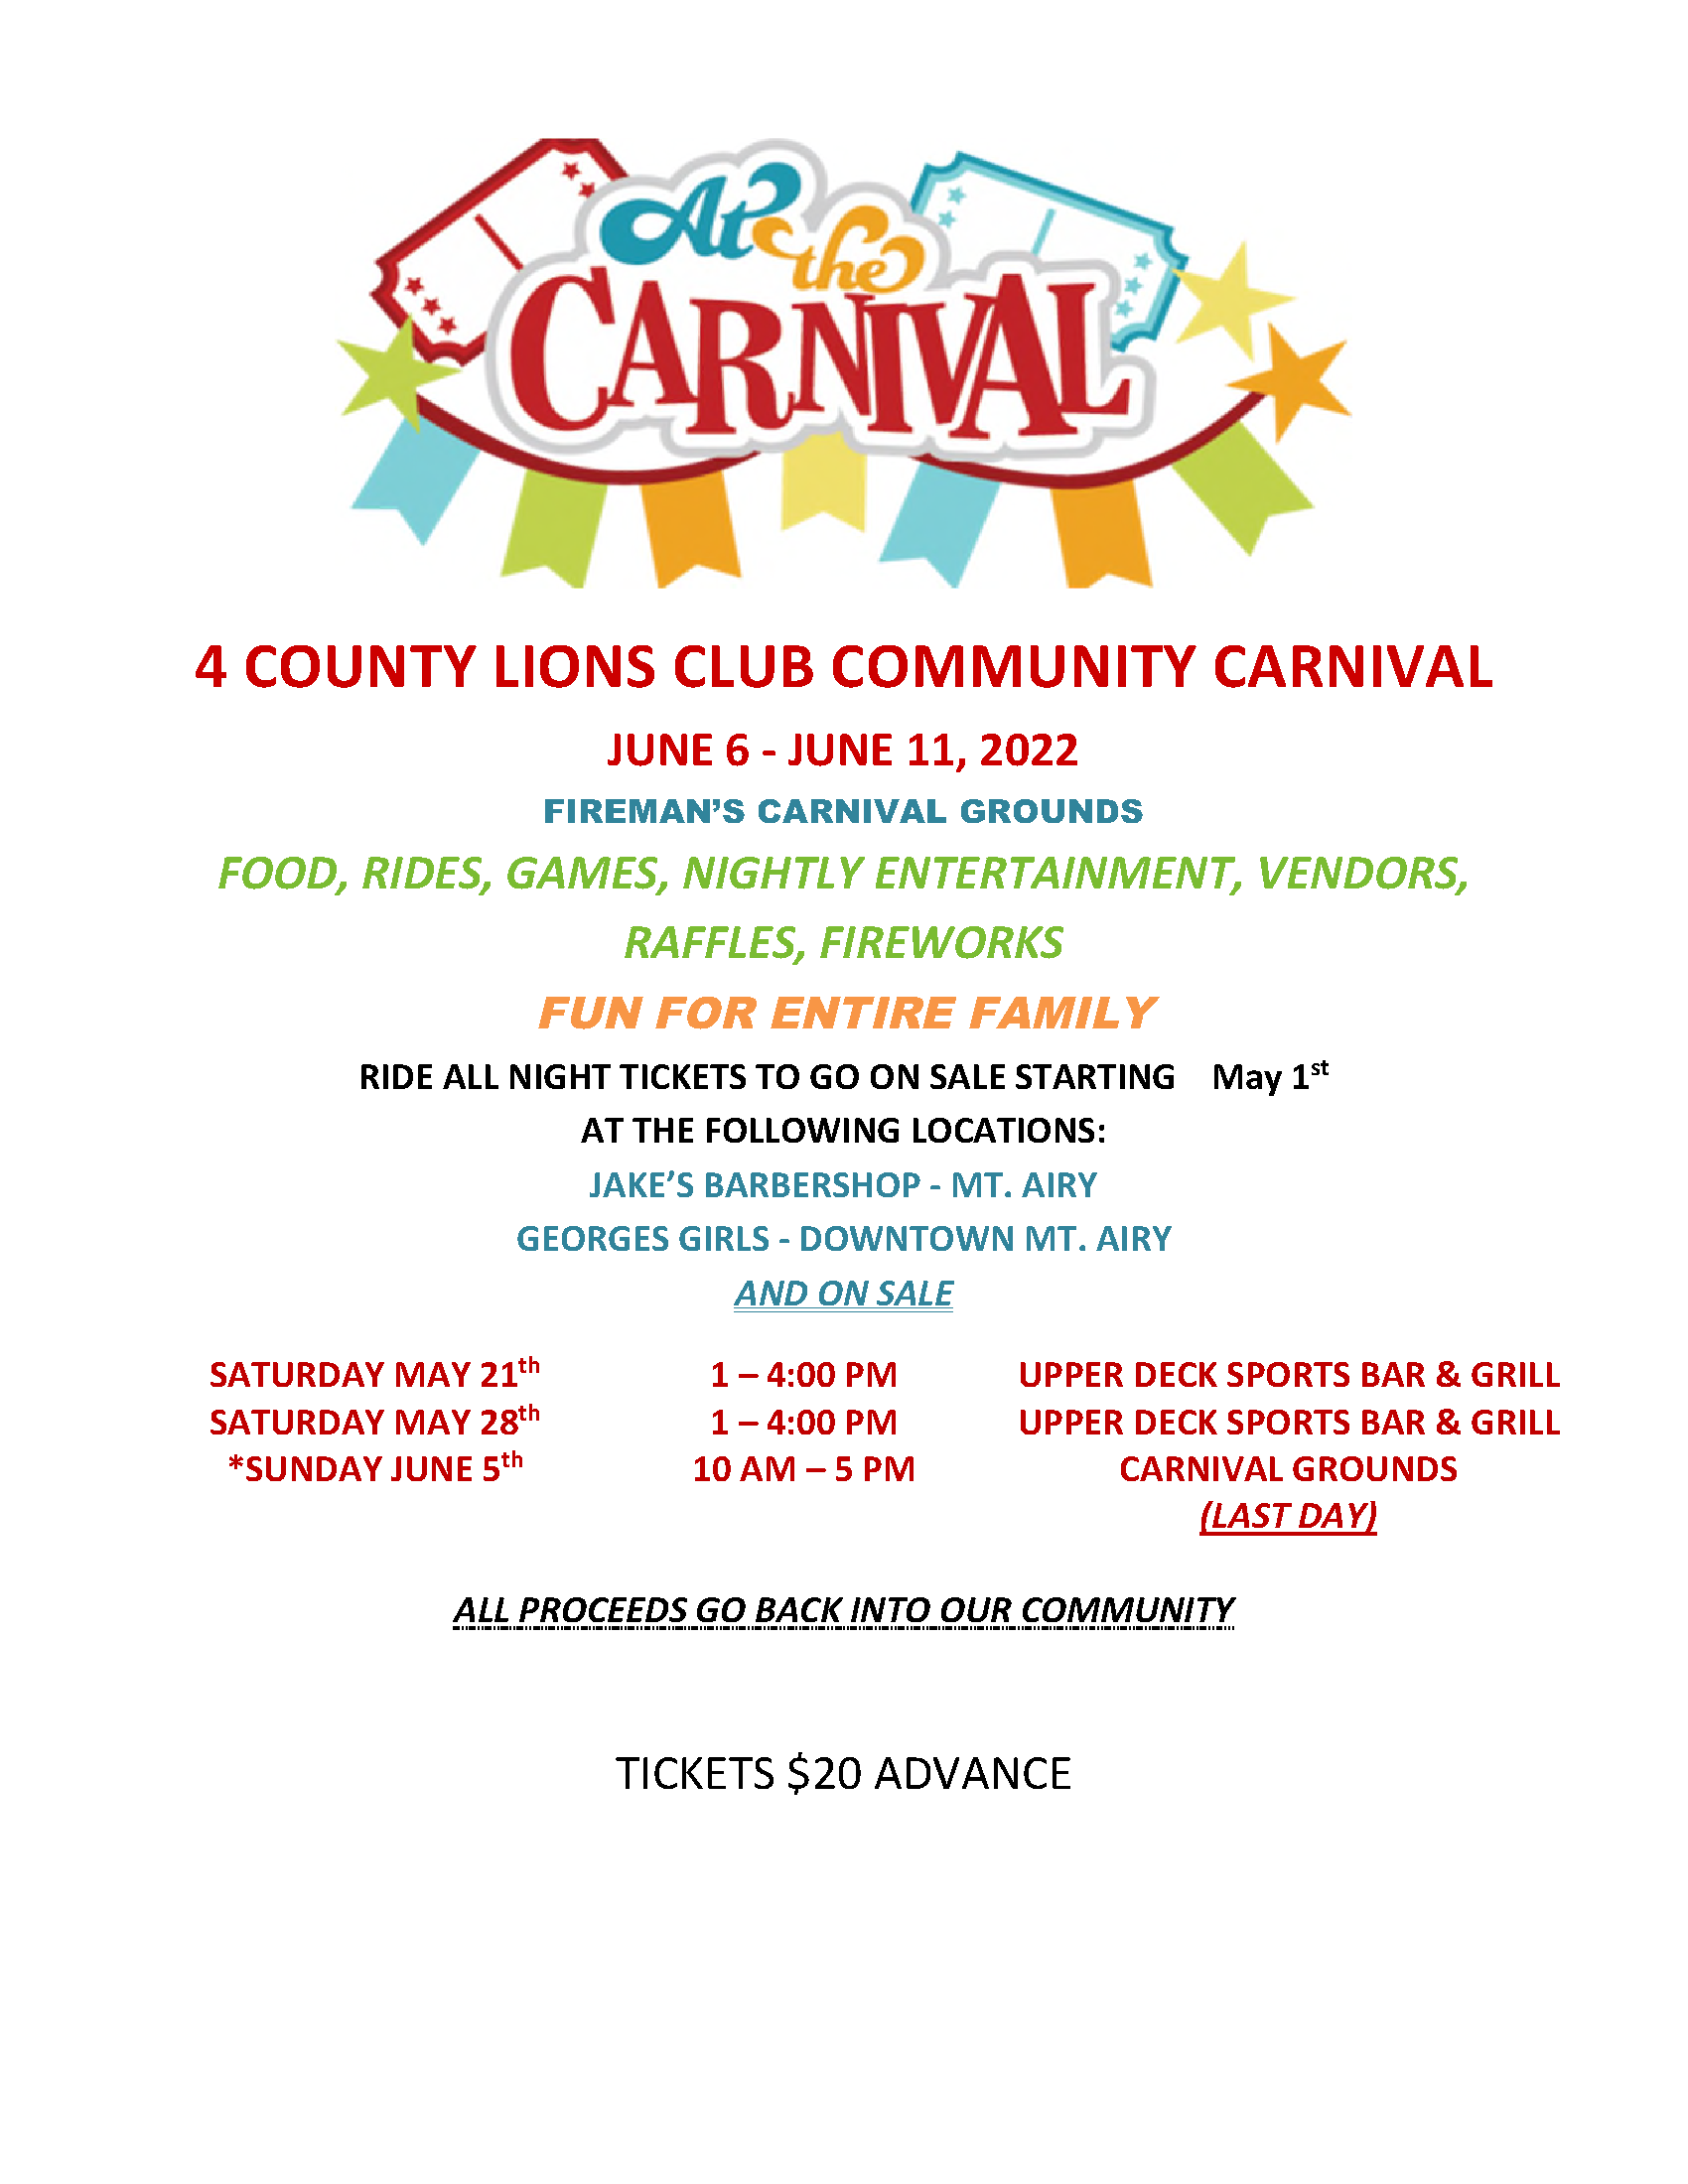 4 County Lions Community Carnival 4 County Lions Club